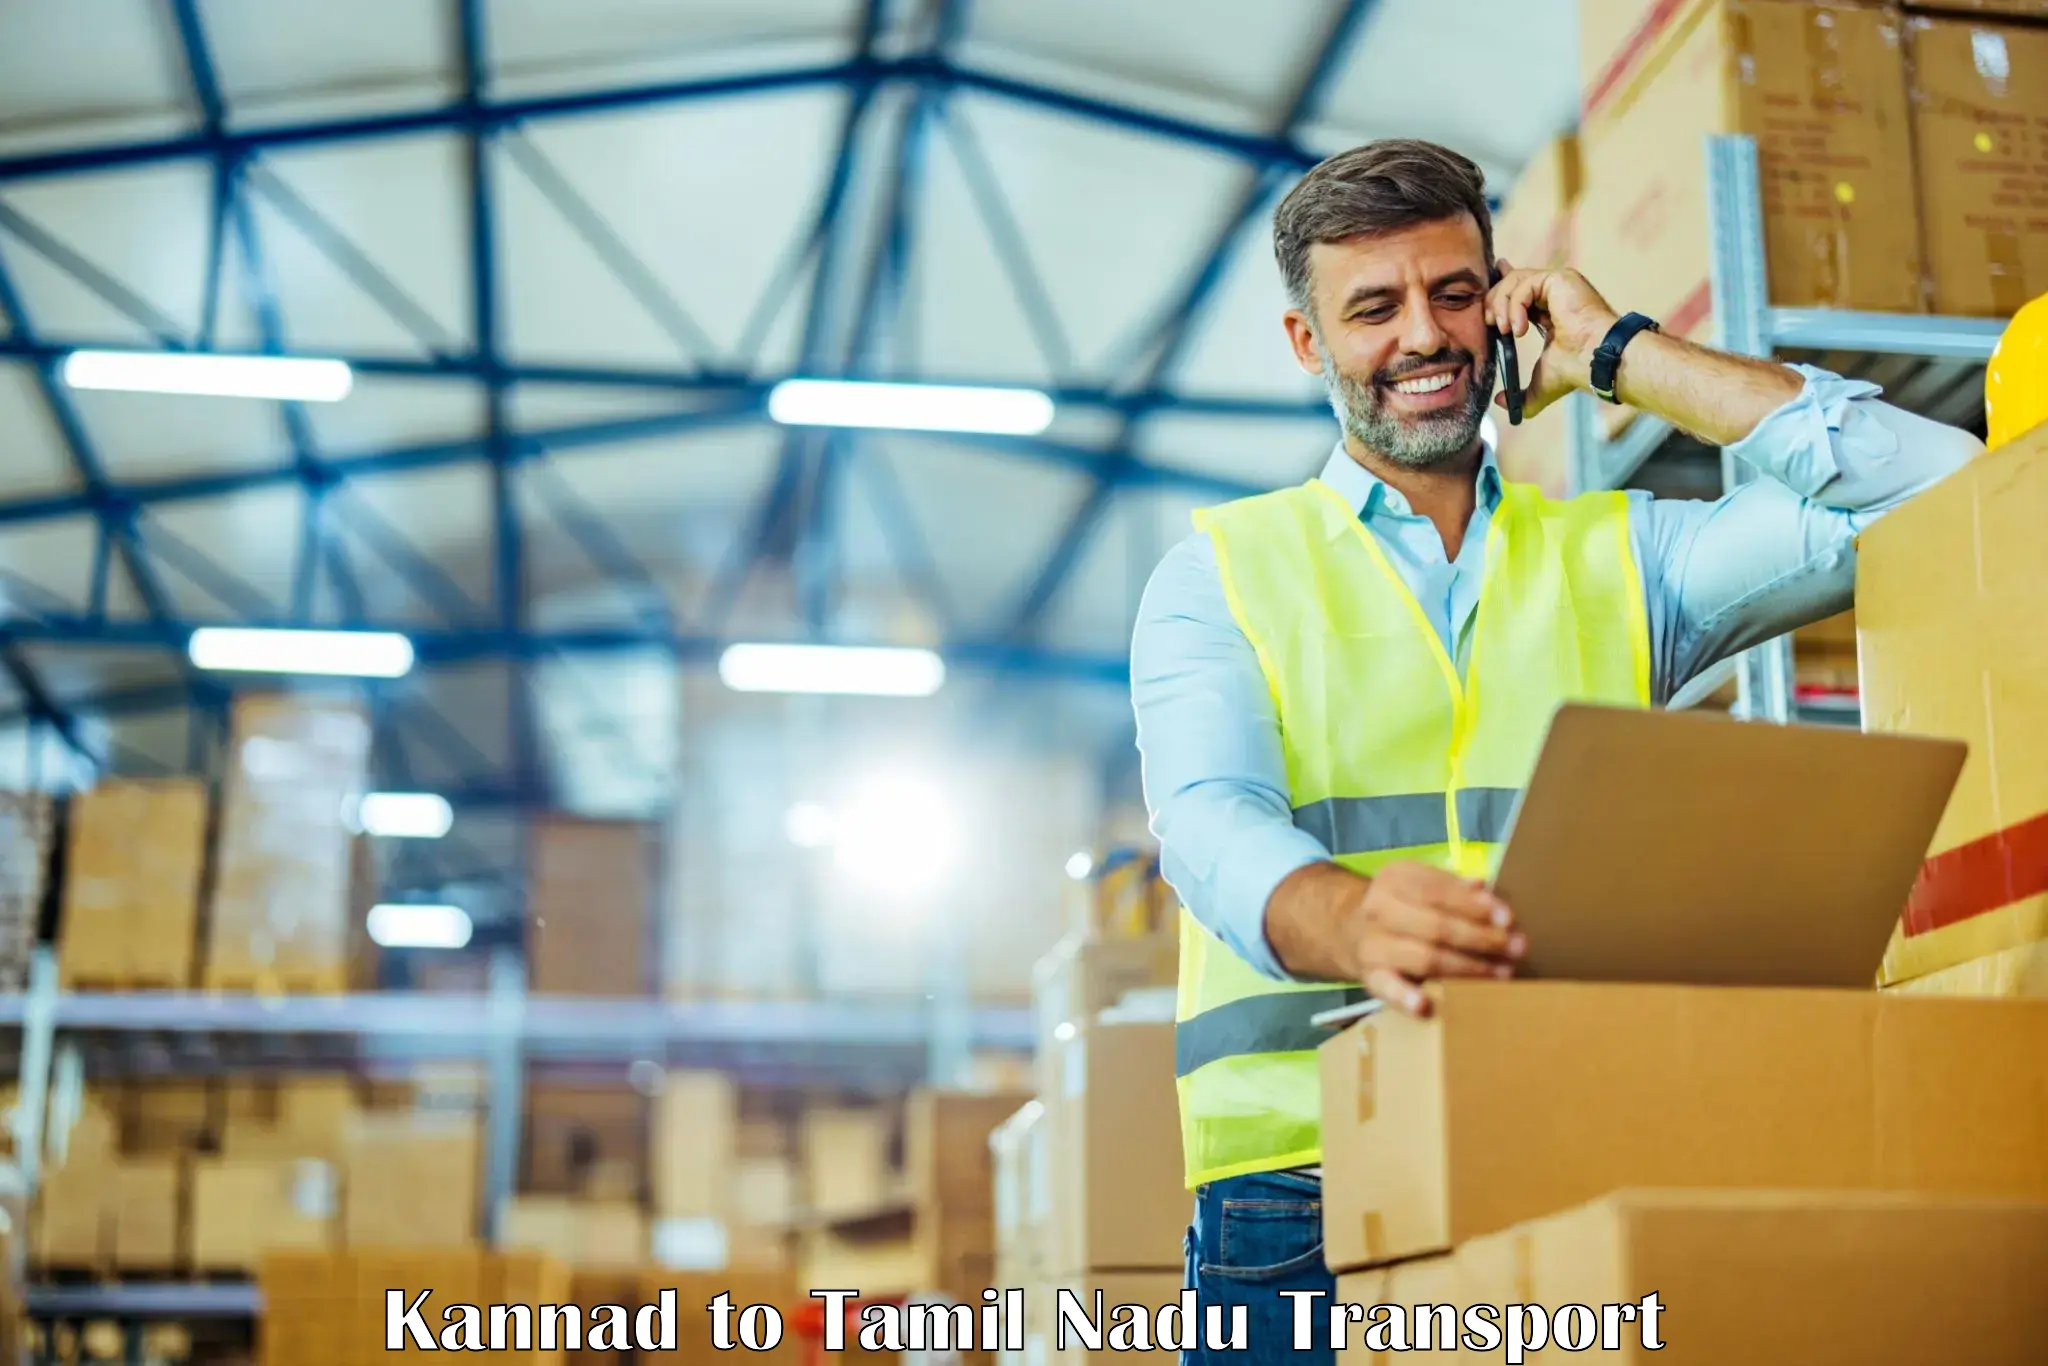 Air freight transport services Kannad to Vadipatti